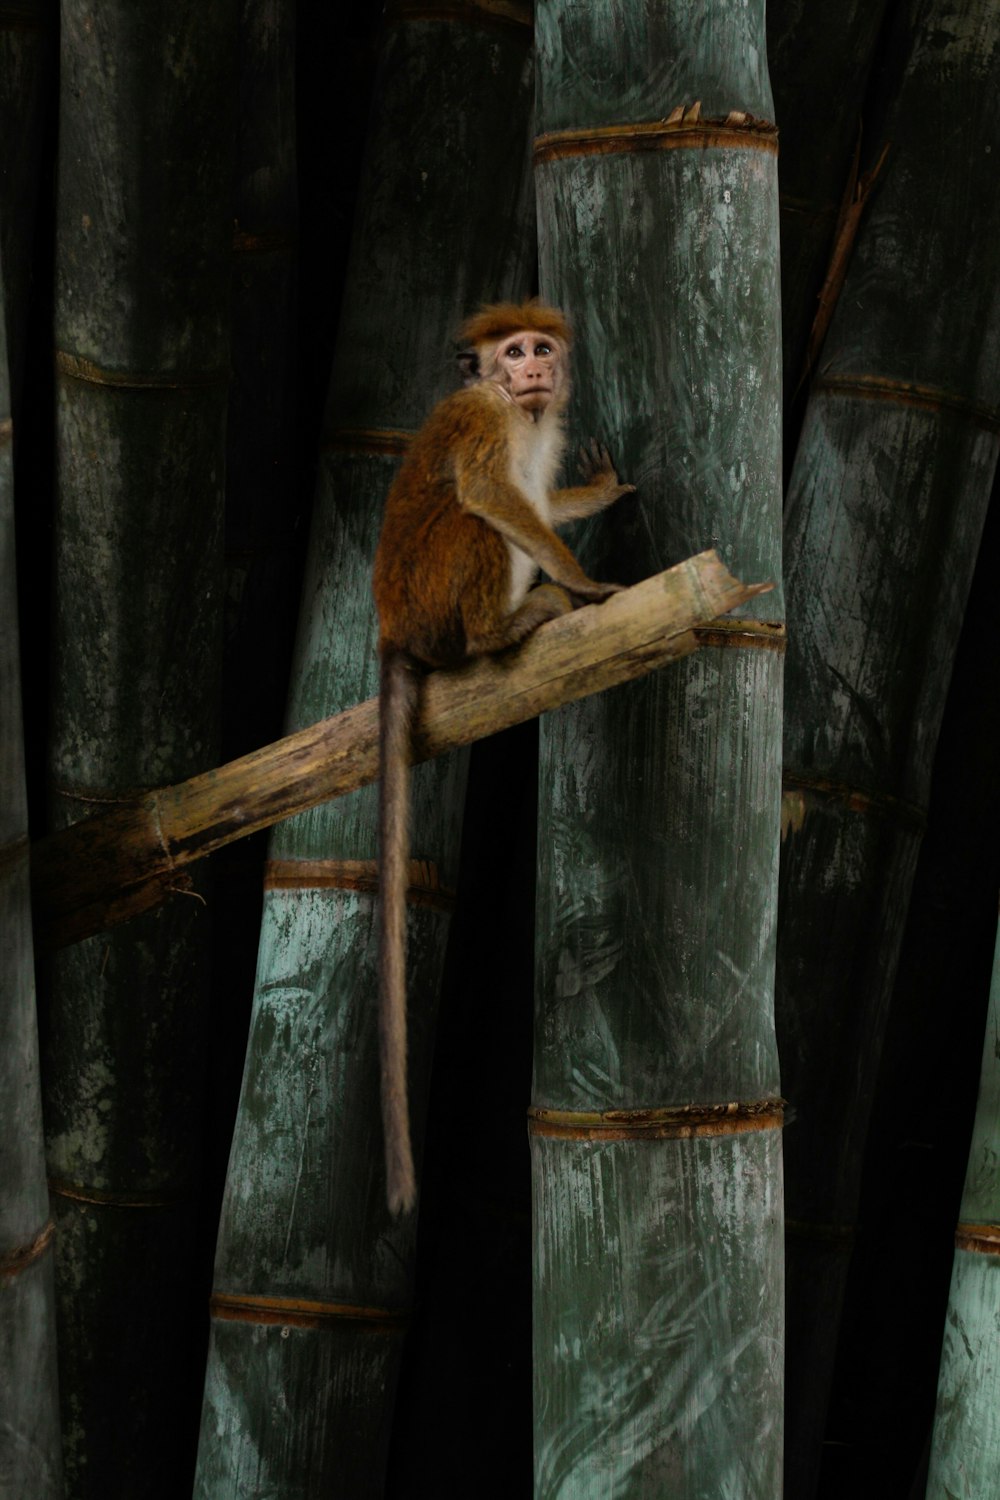 brown monkey on bamboo branch